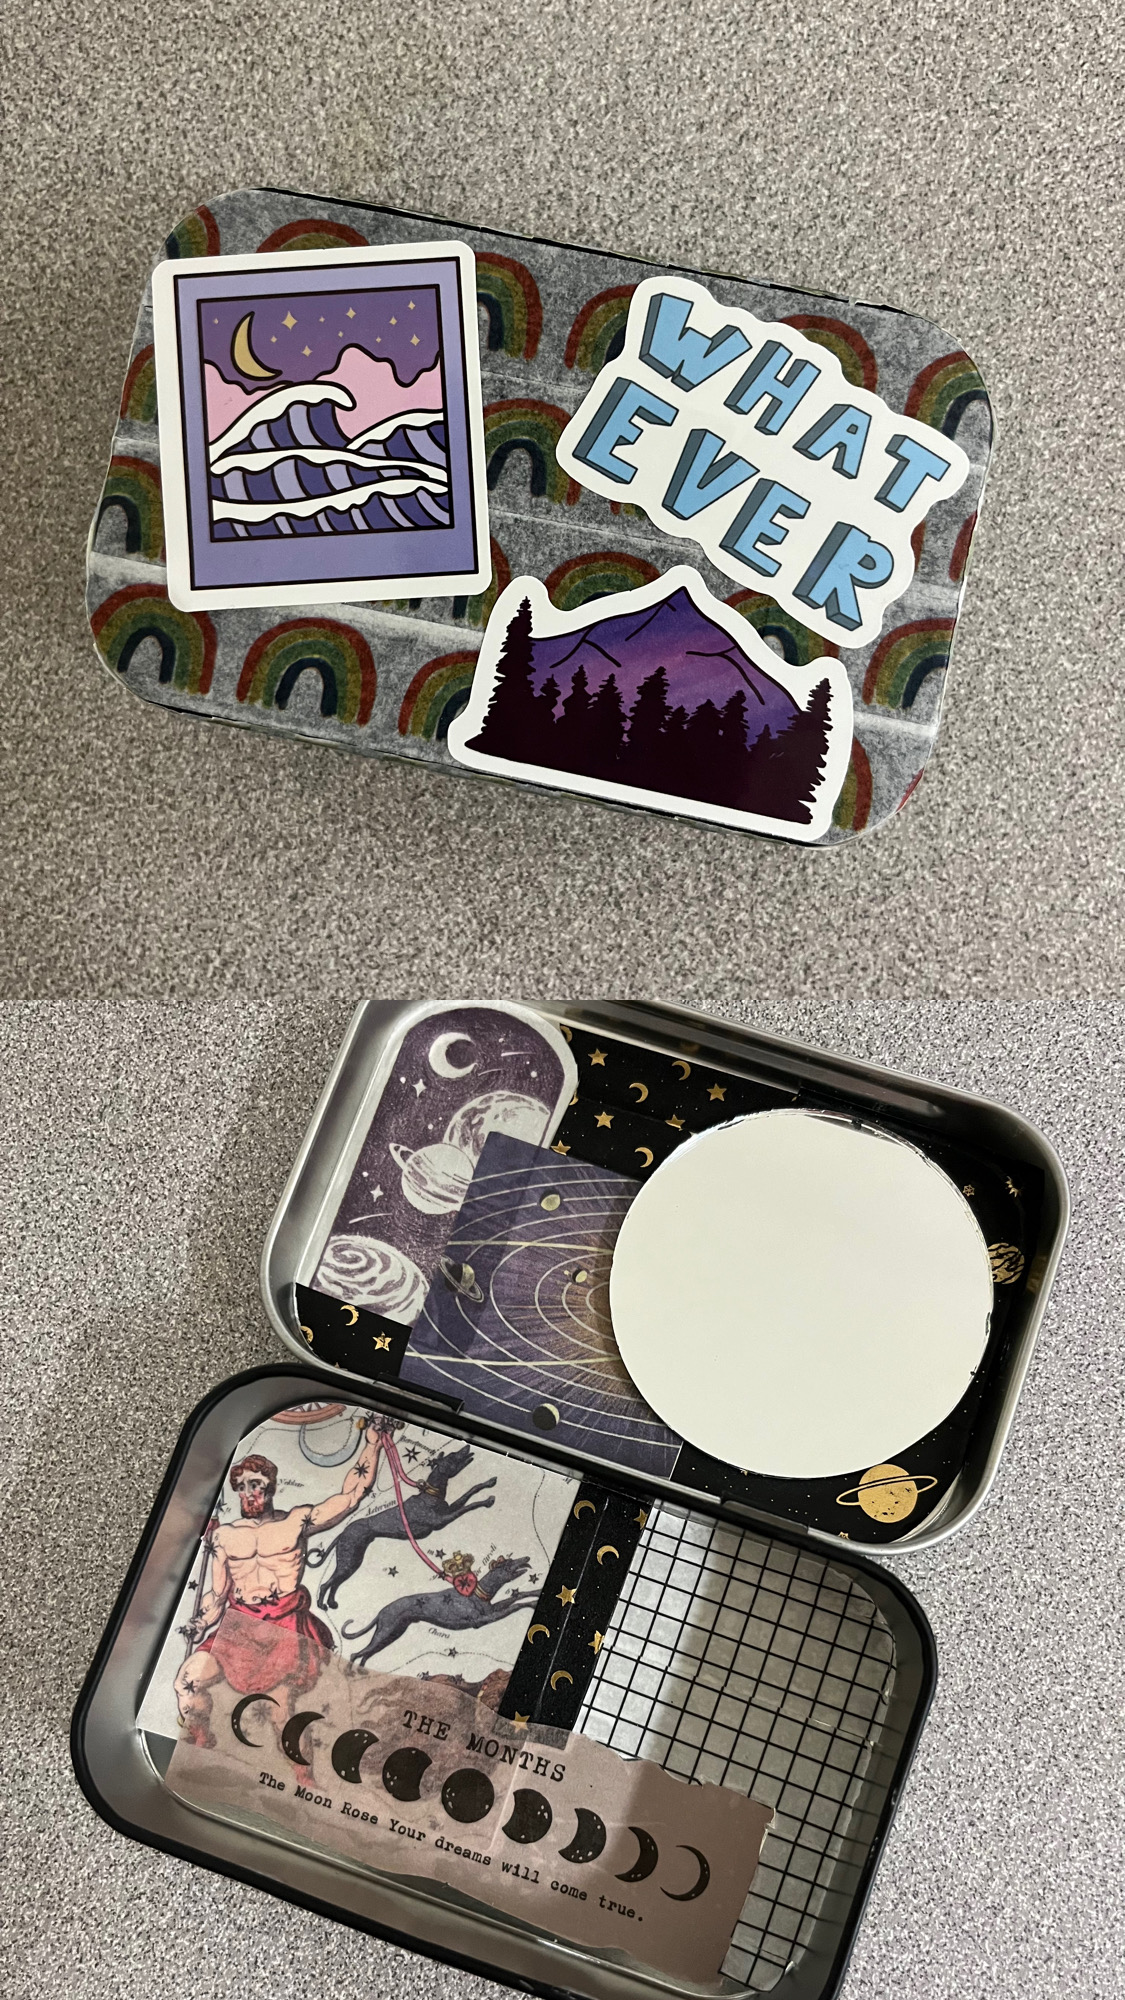 A sample Altoids Tin Kit, with colorful stickers and washi tape on the front, and colorful stickers, washi tape, and a small circular mirror on the inside.